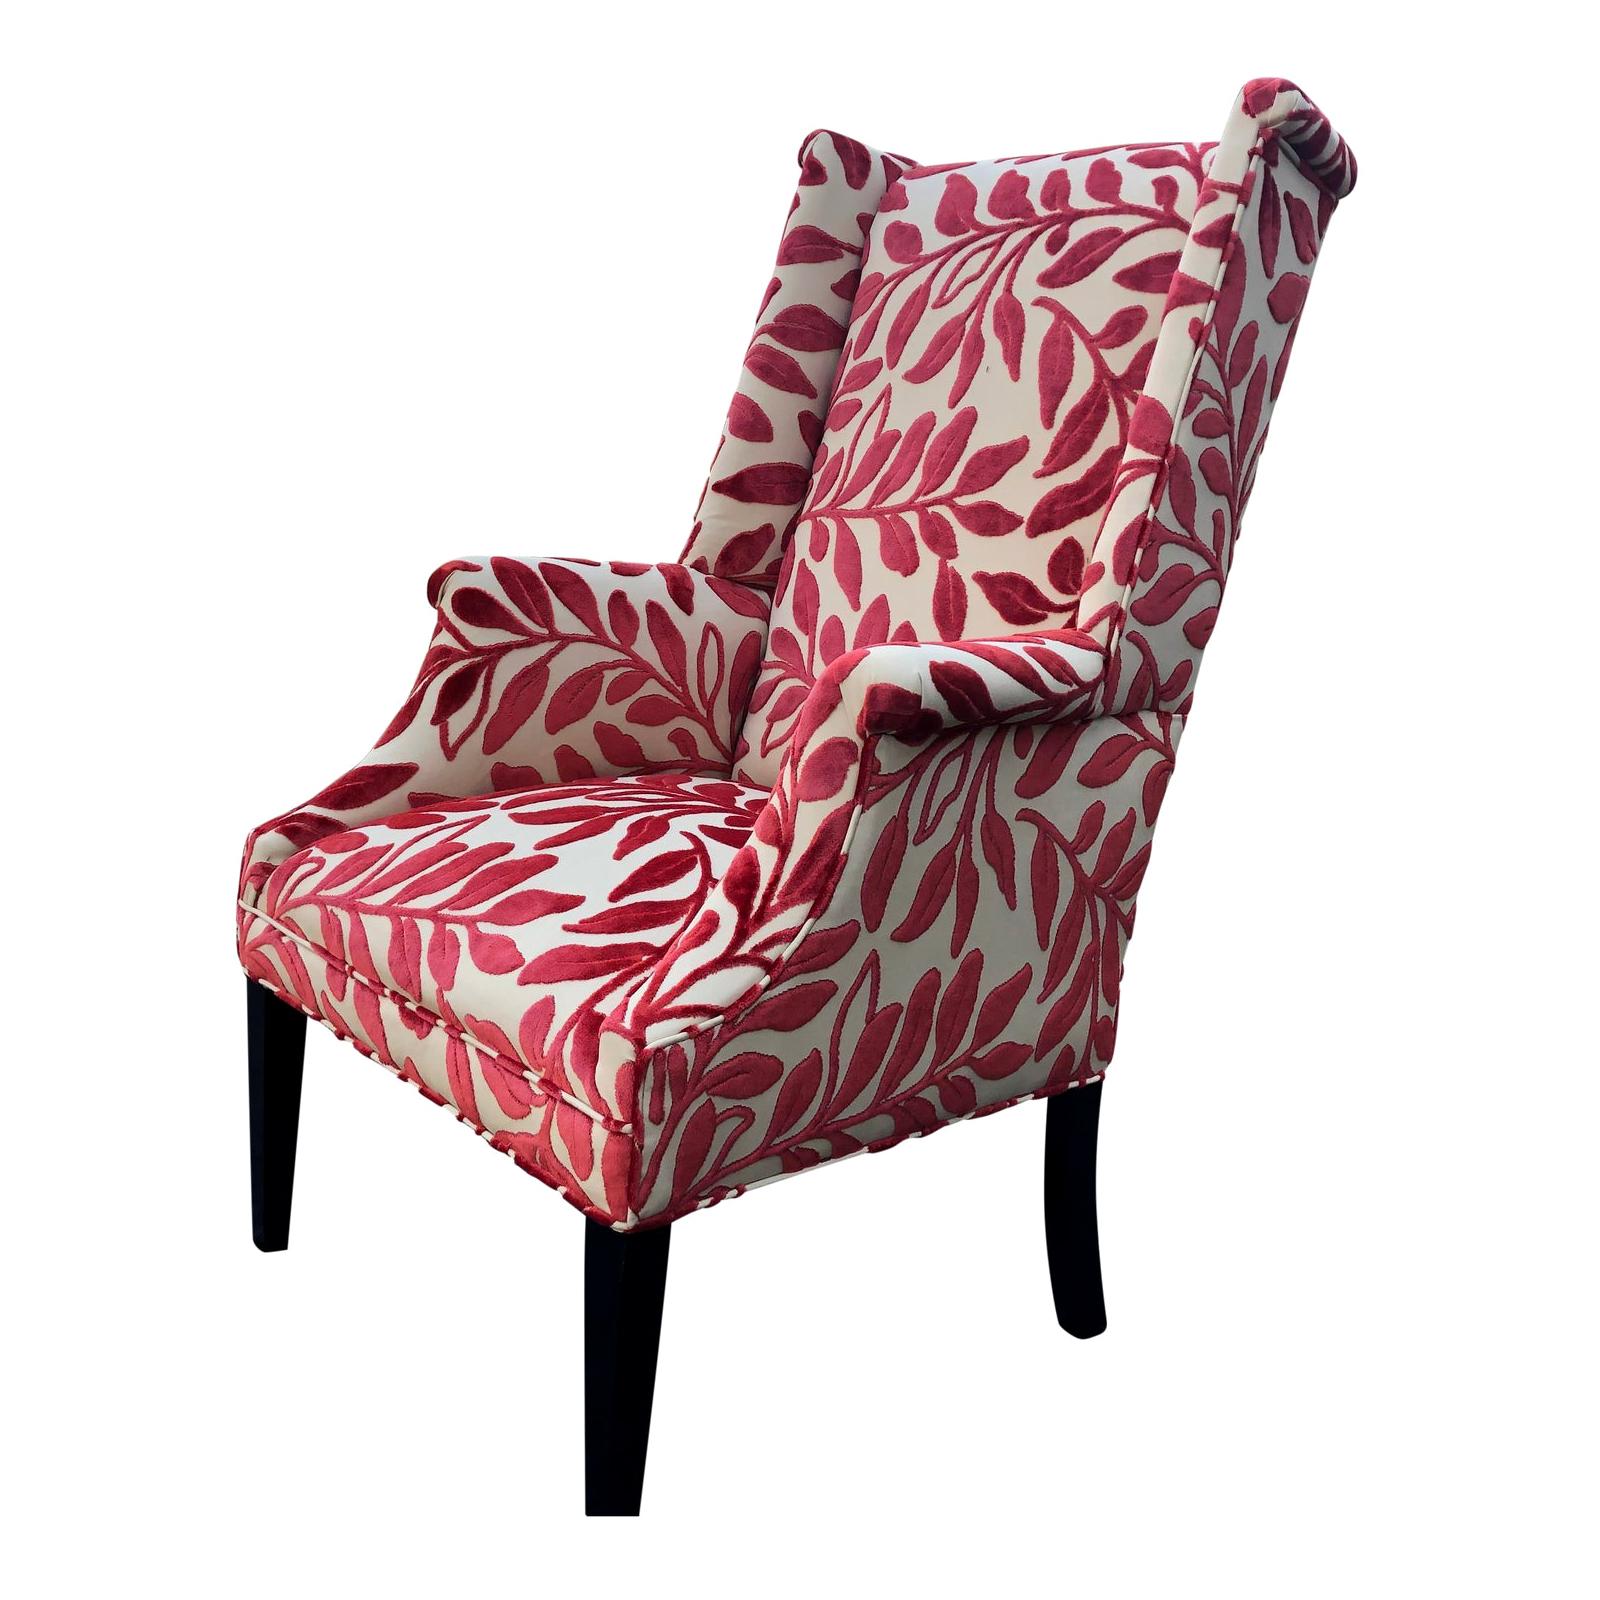 Stylish Classic Wing Chair with Updated Upholstery